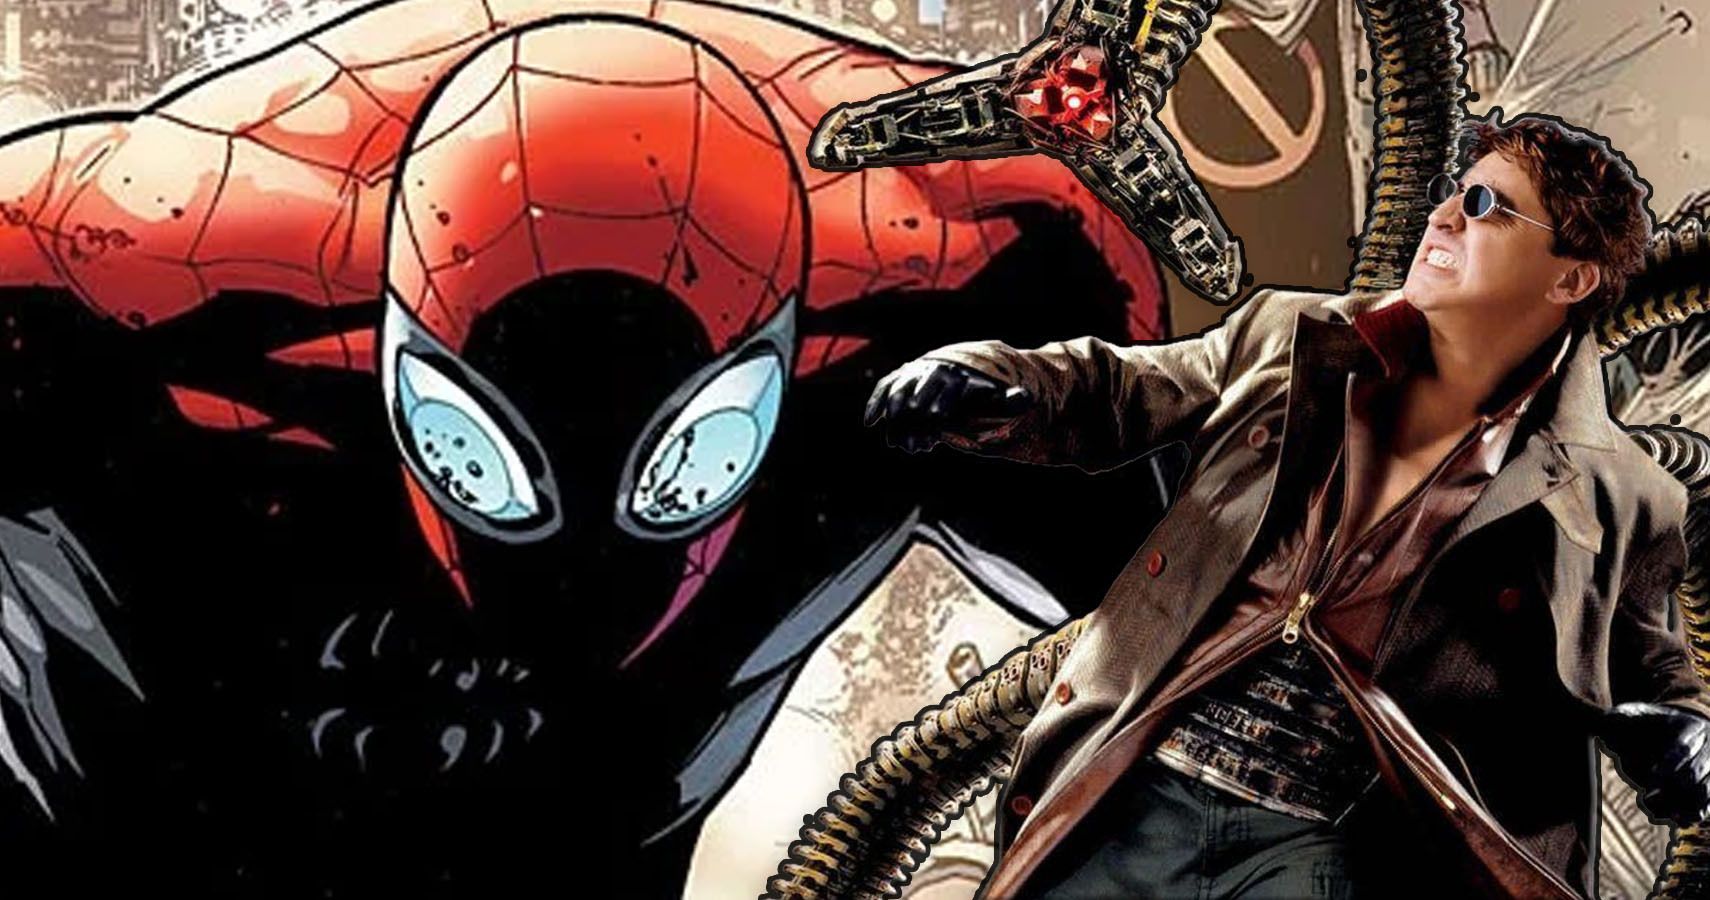 The Superior Spider-Man juxtaposed with Alfred Molina's Doc Ock in Marvel movies